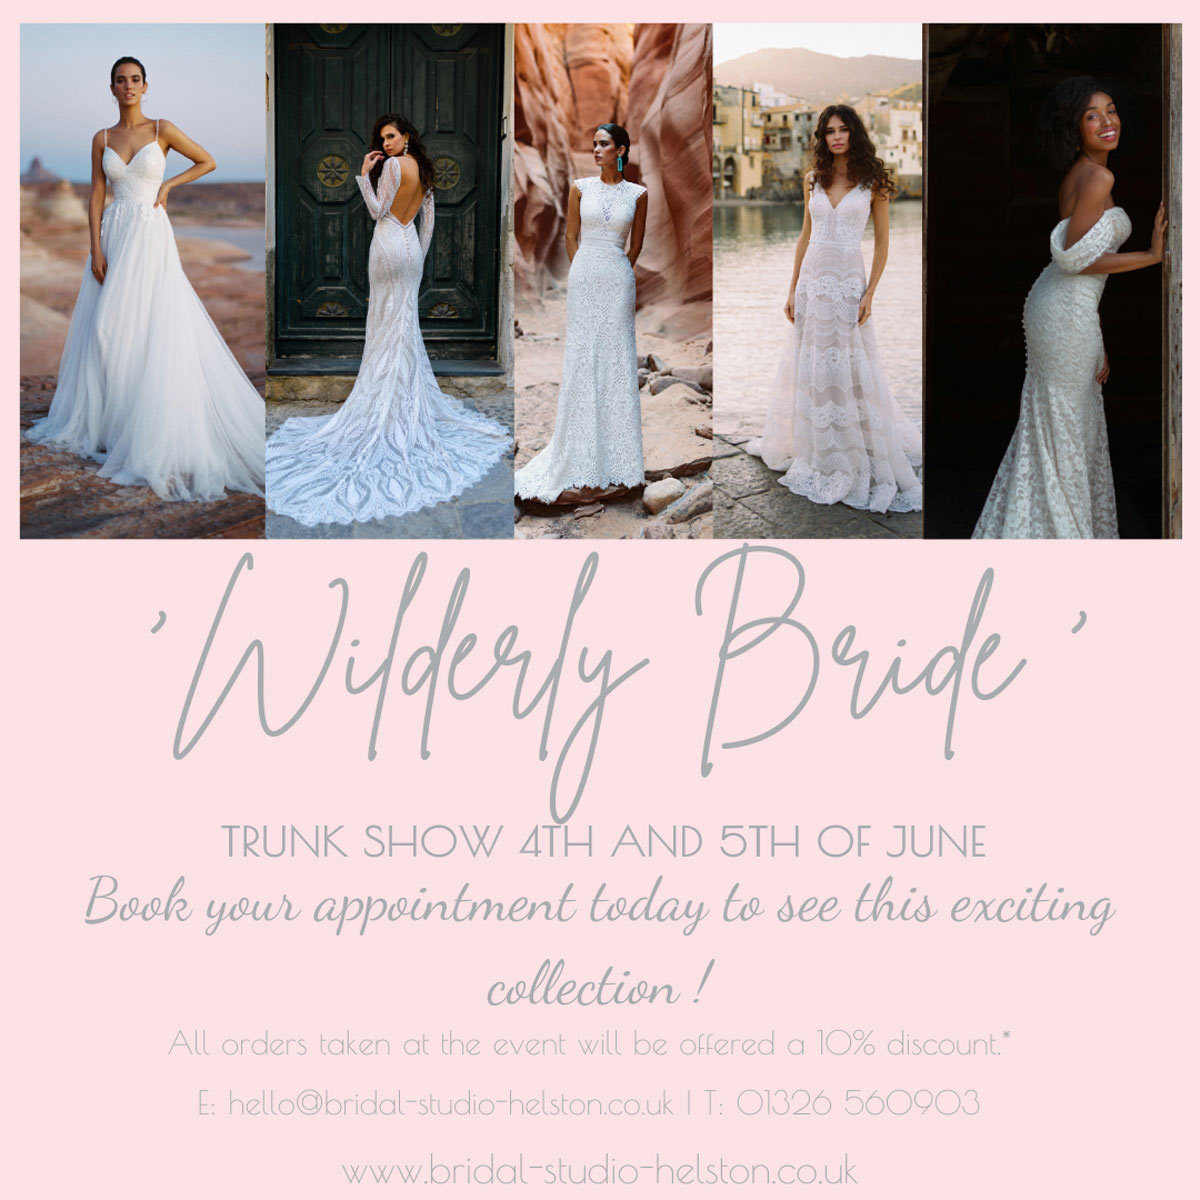 Wilderly Bride trunk show at The Bridal Studio